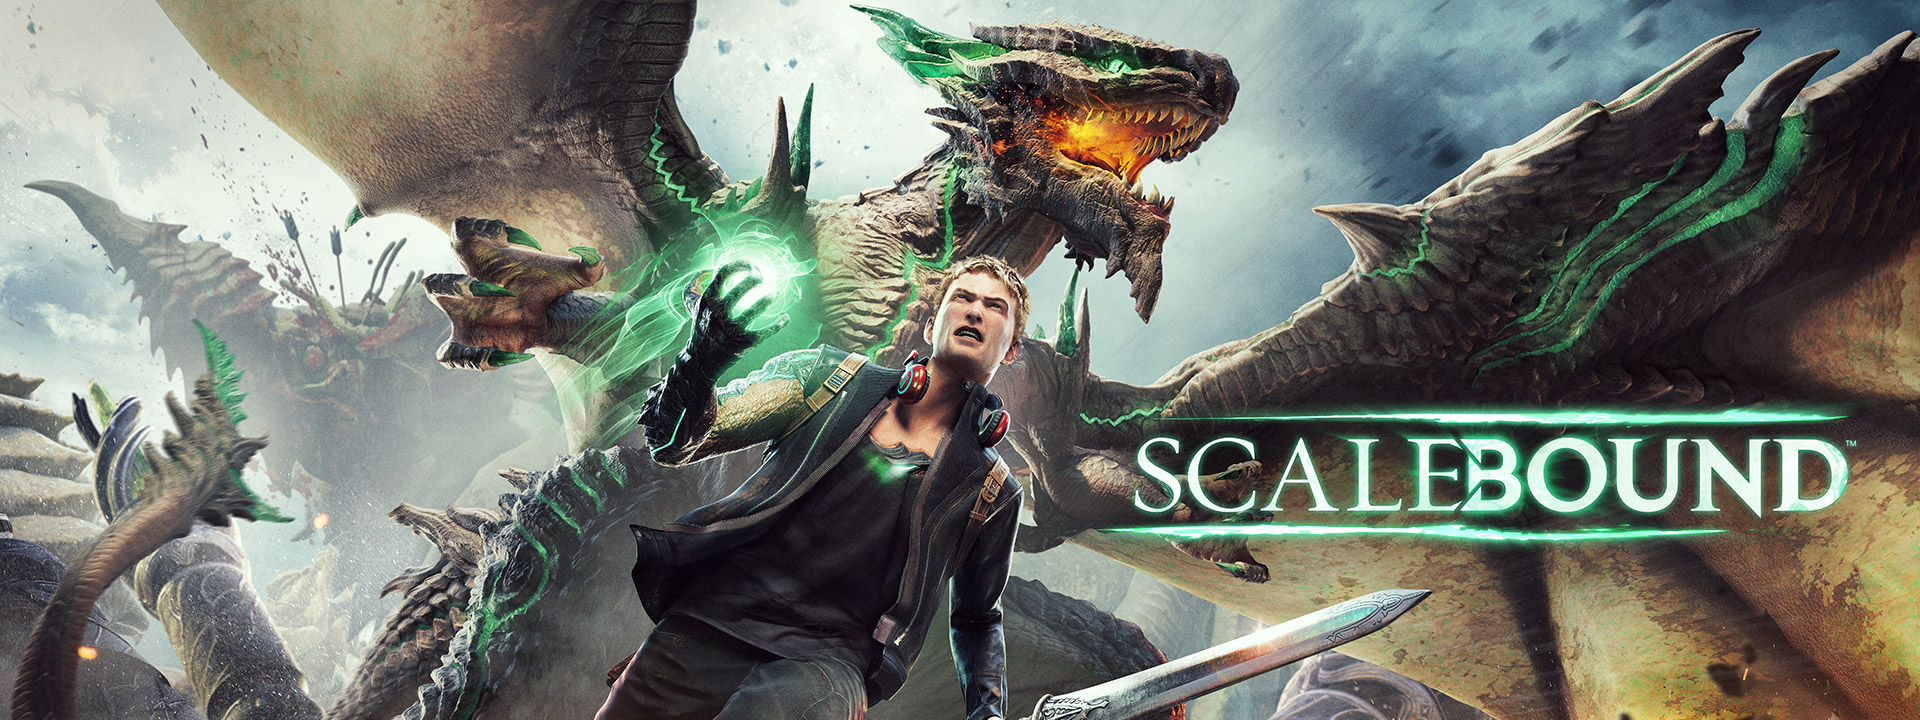 Scalebound is officially cancelled